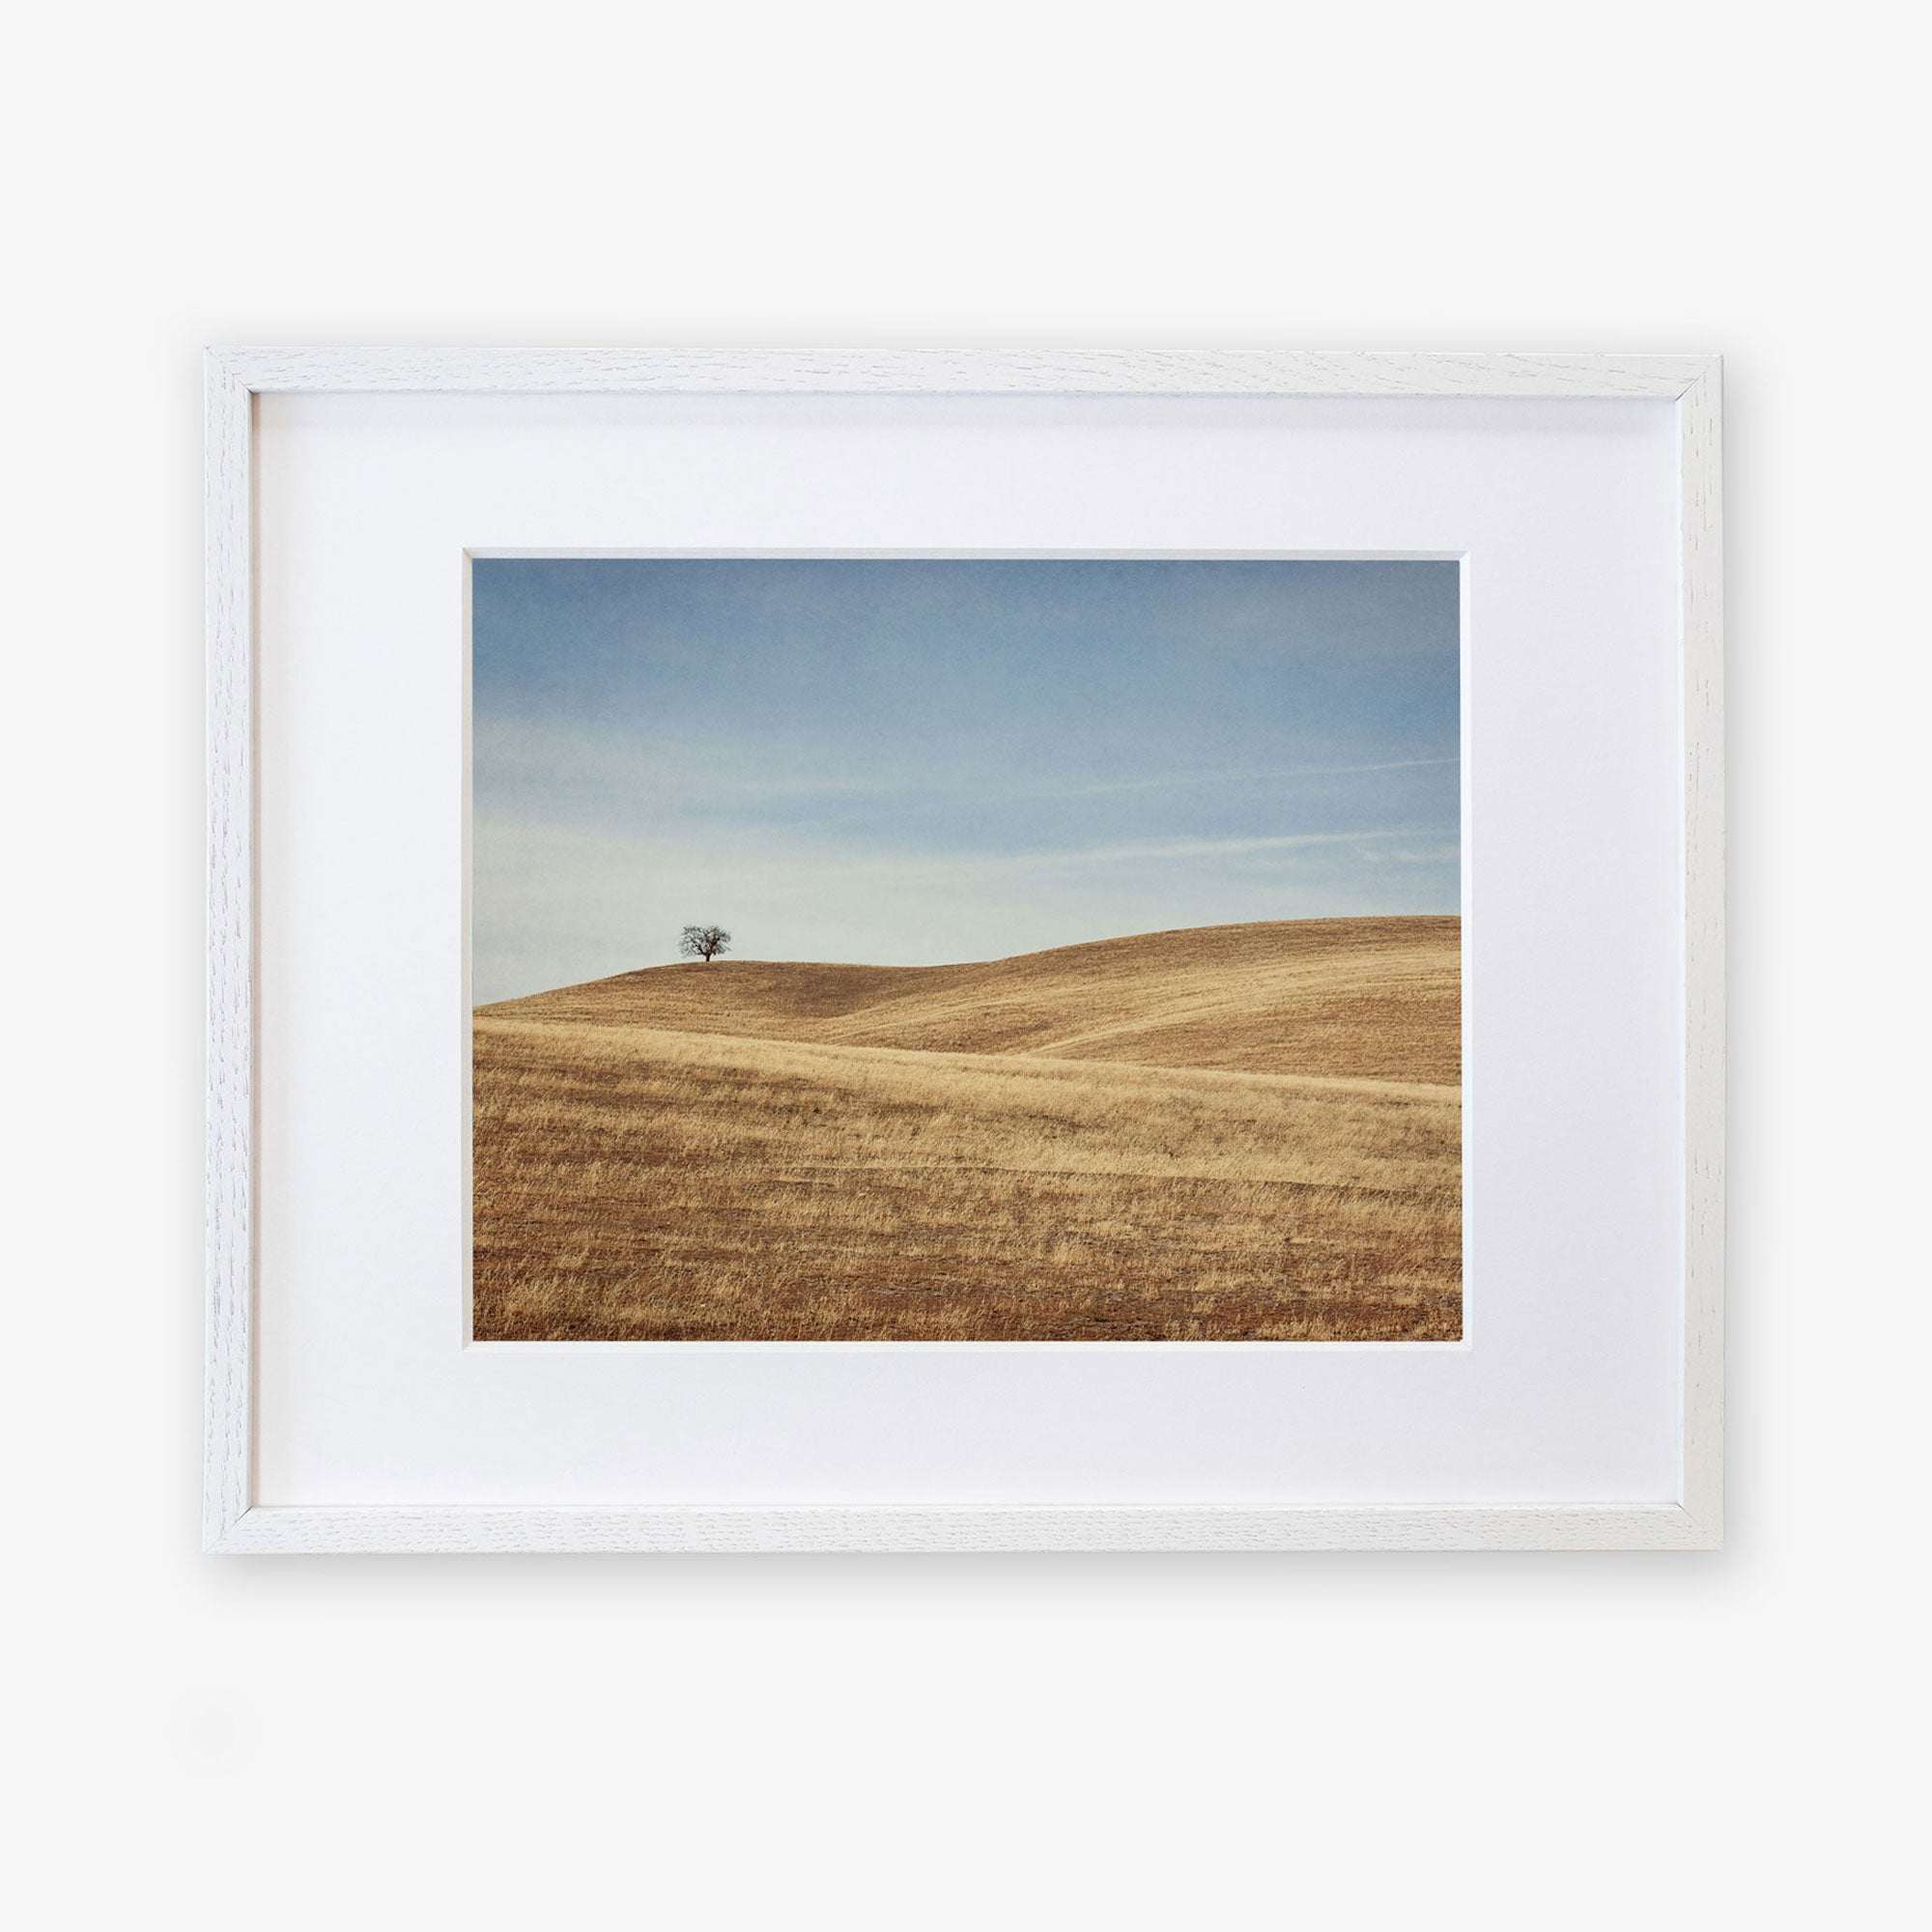 A framed photograph depicting a serene landscape in Santa Ynez Valley with rolling hills covered in dry grass and a solitary tree under a clear sky - Offley Green&#39;s California Central Coast Landscape Print &#39;Golden Ynez&#39;.